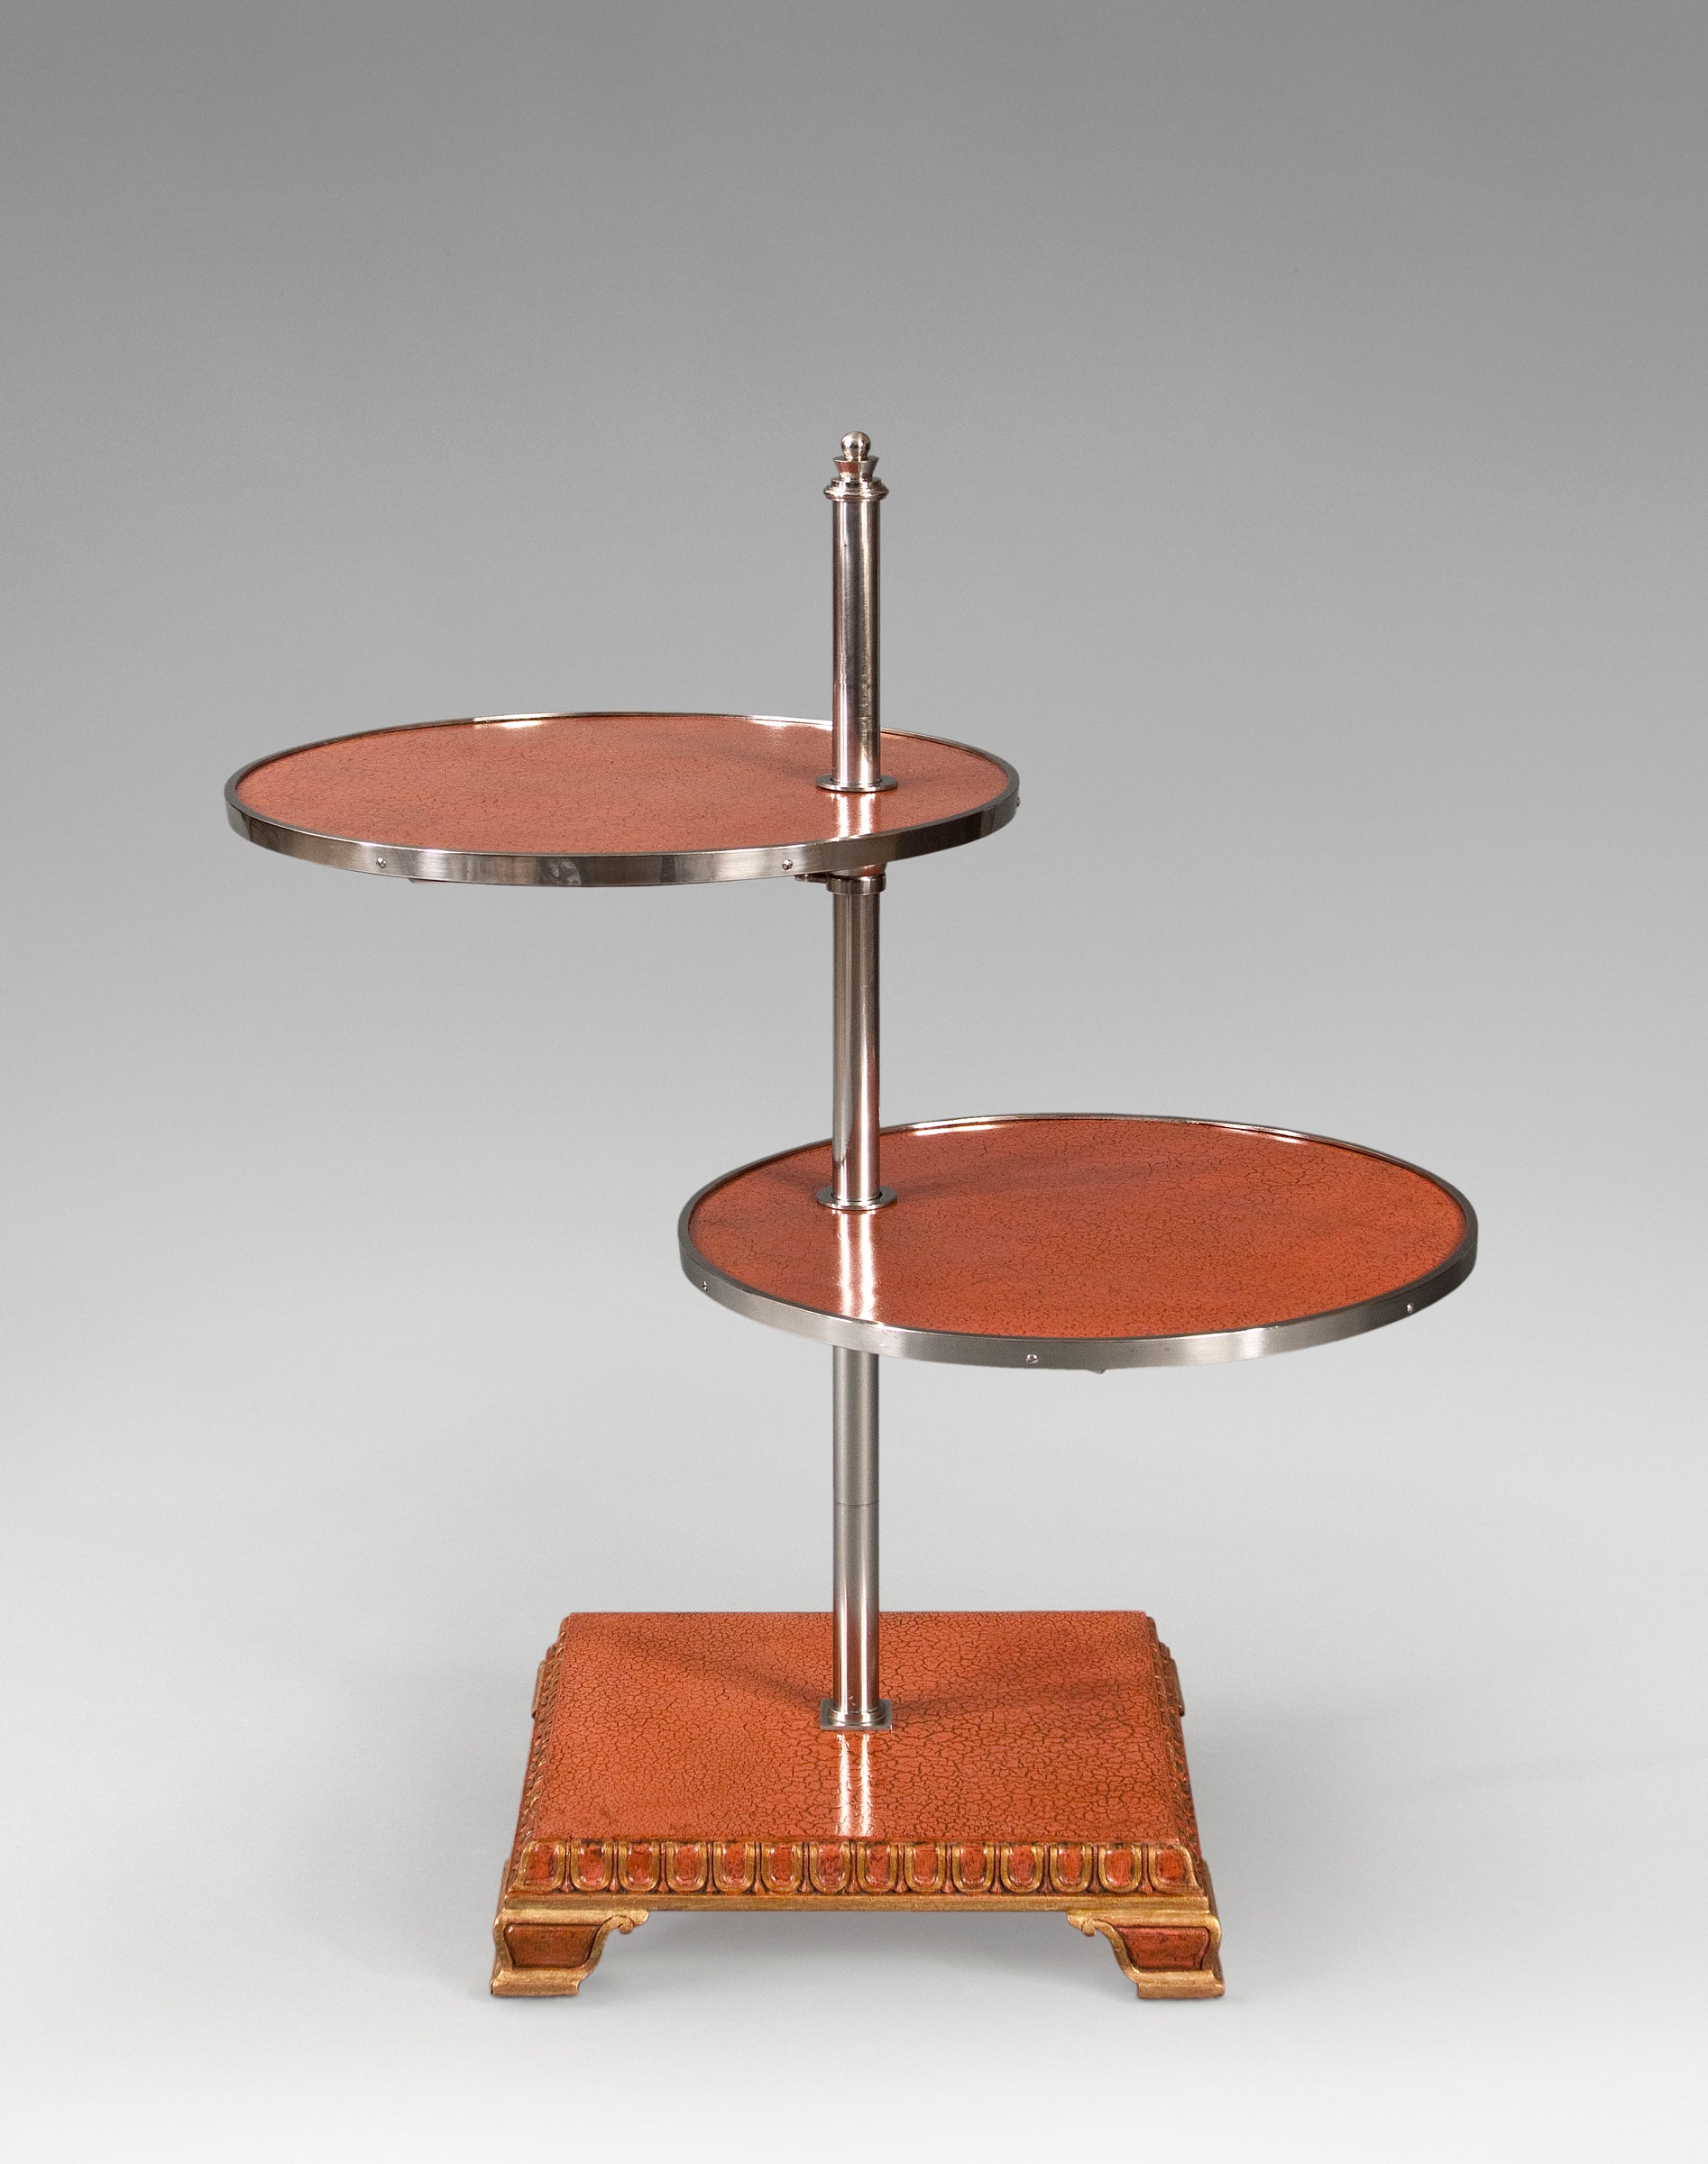 A Nickel, Parcel-Gilt and Crackled Lacquer Adjustable Table by Axel Einar Hjorth For Sale